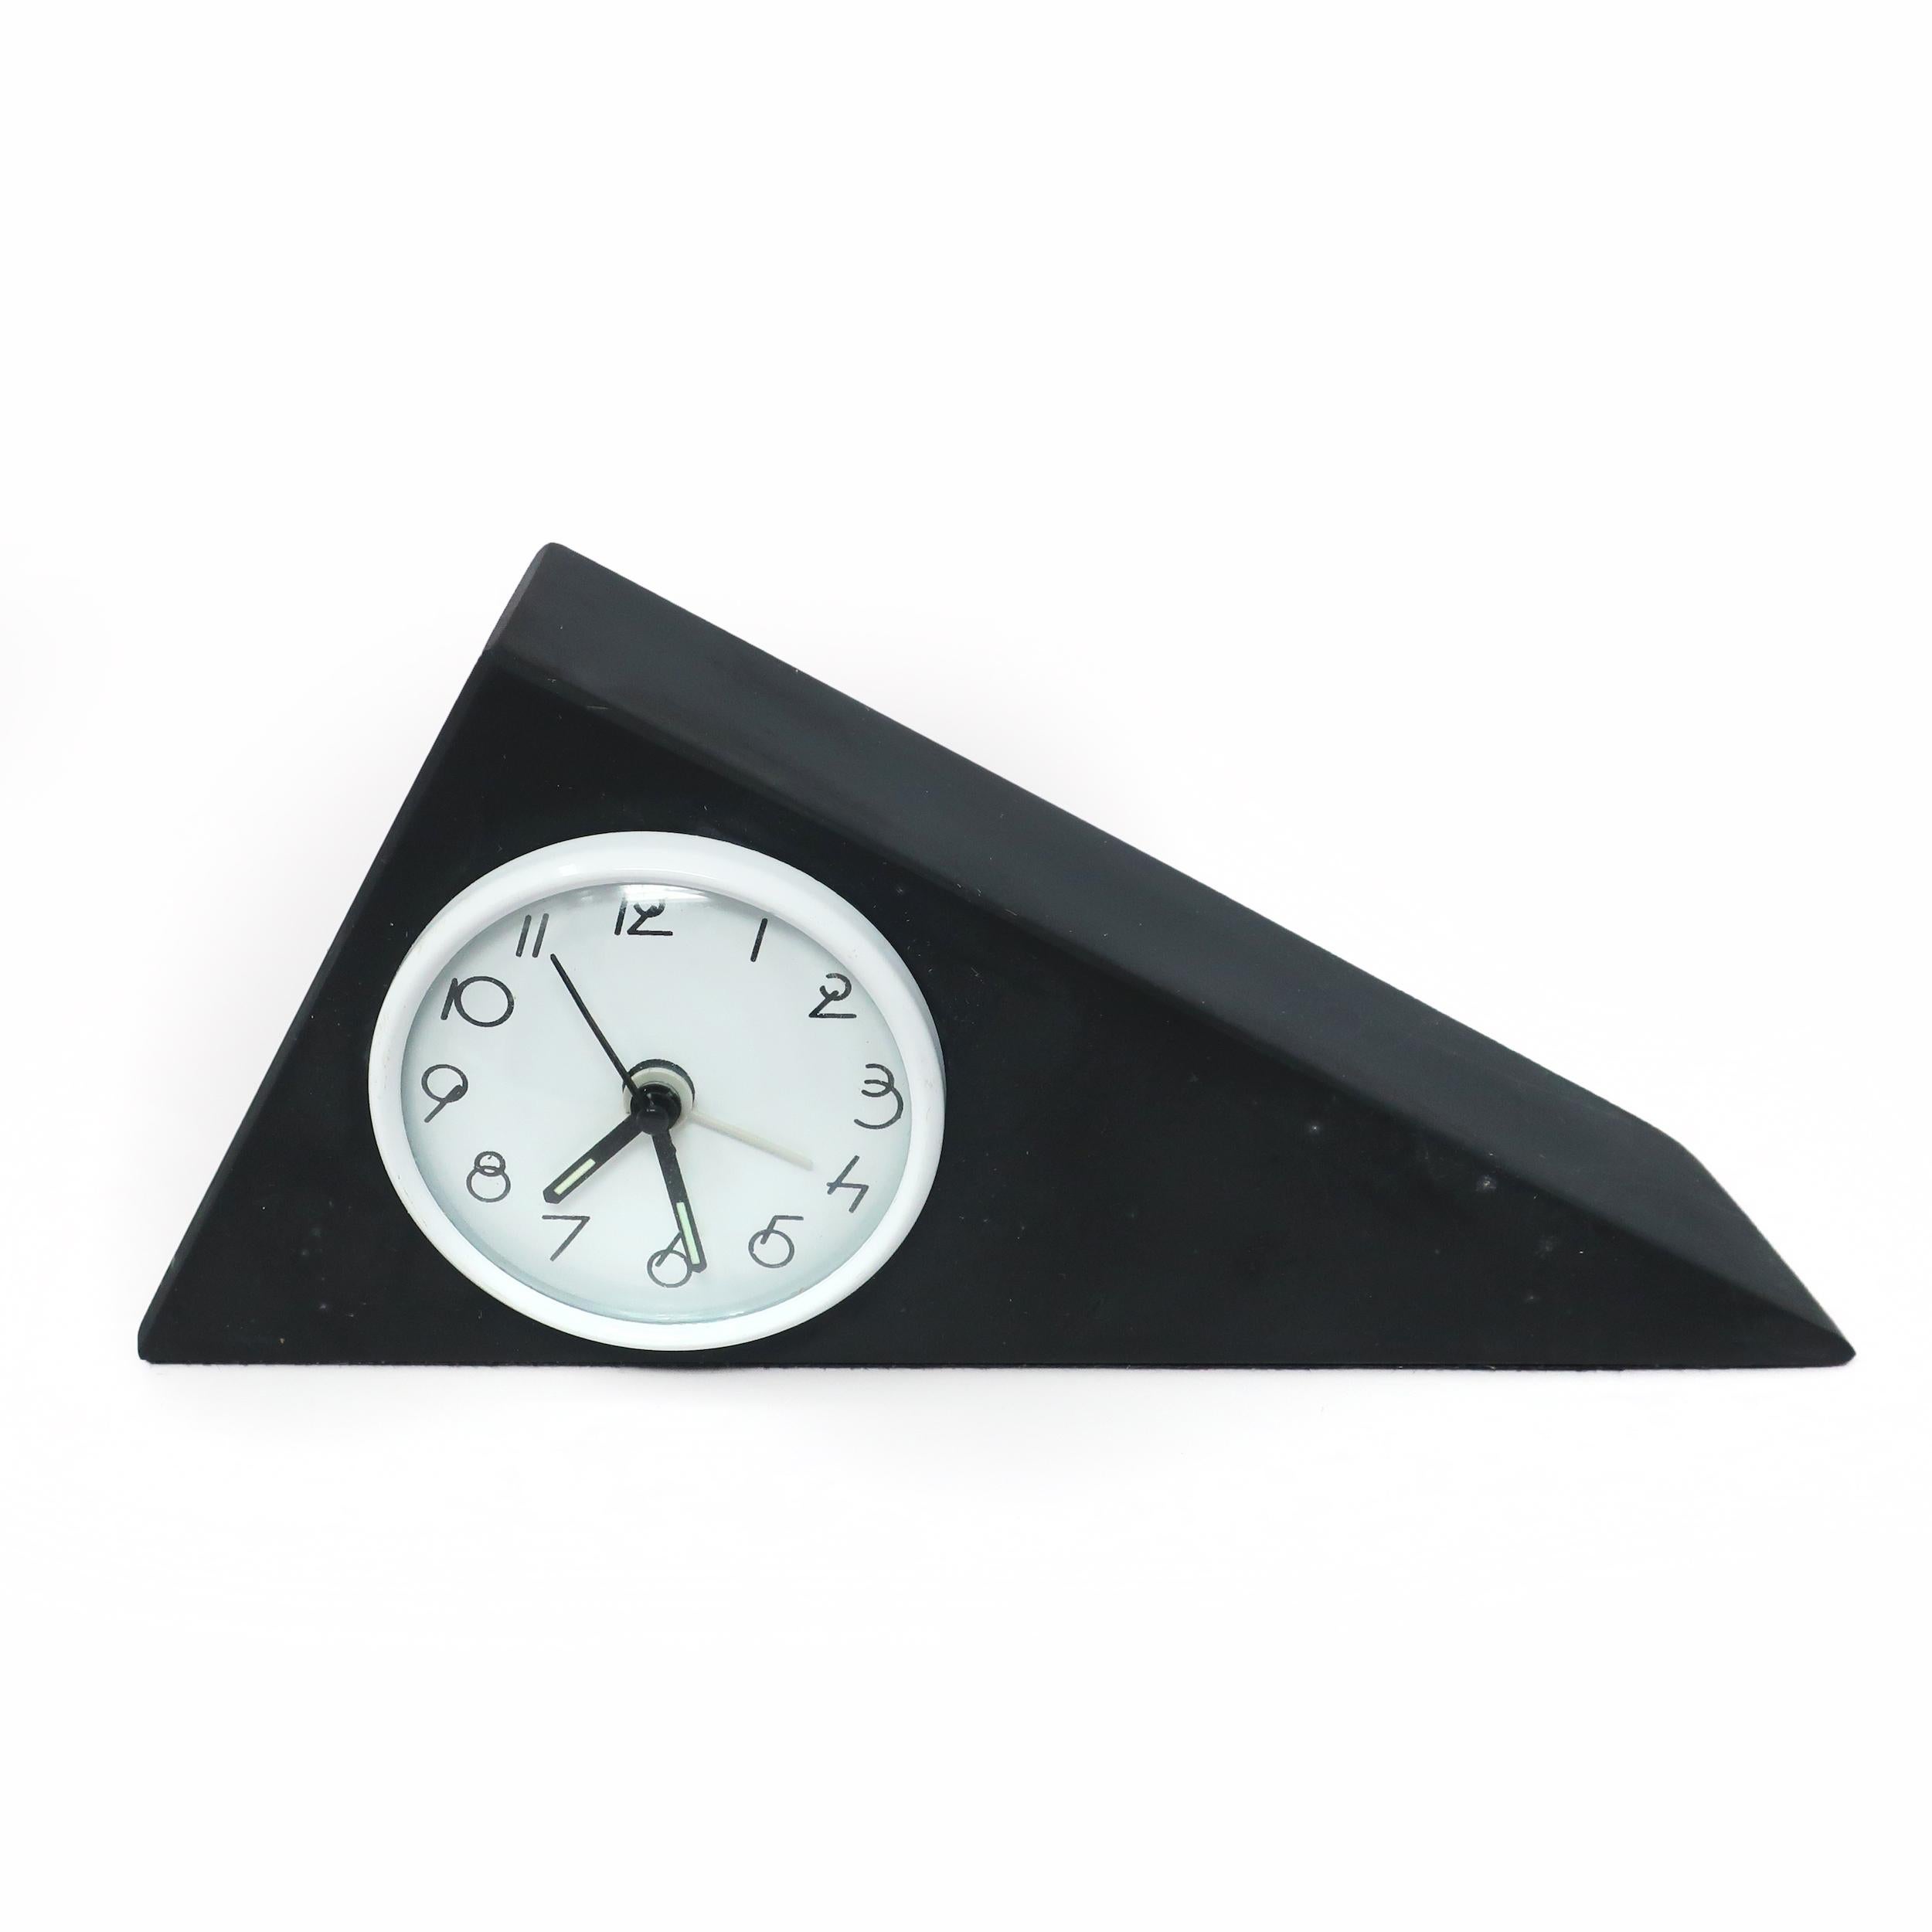 A stunning Italian slate desk clock in the shape of a triangle with black hands, white face, black hands, and stylized Art Deco numbers. Lovely coloring and veining in the slate give it a sophisticated yet natural look.

In good vintage condition.